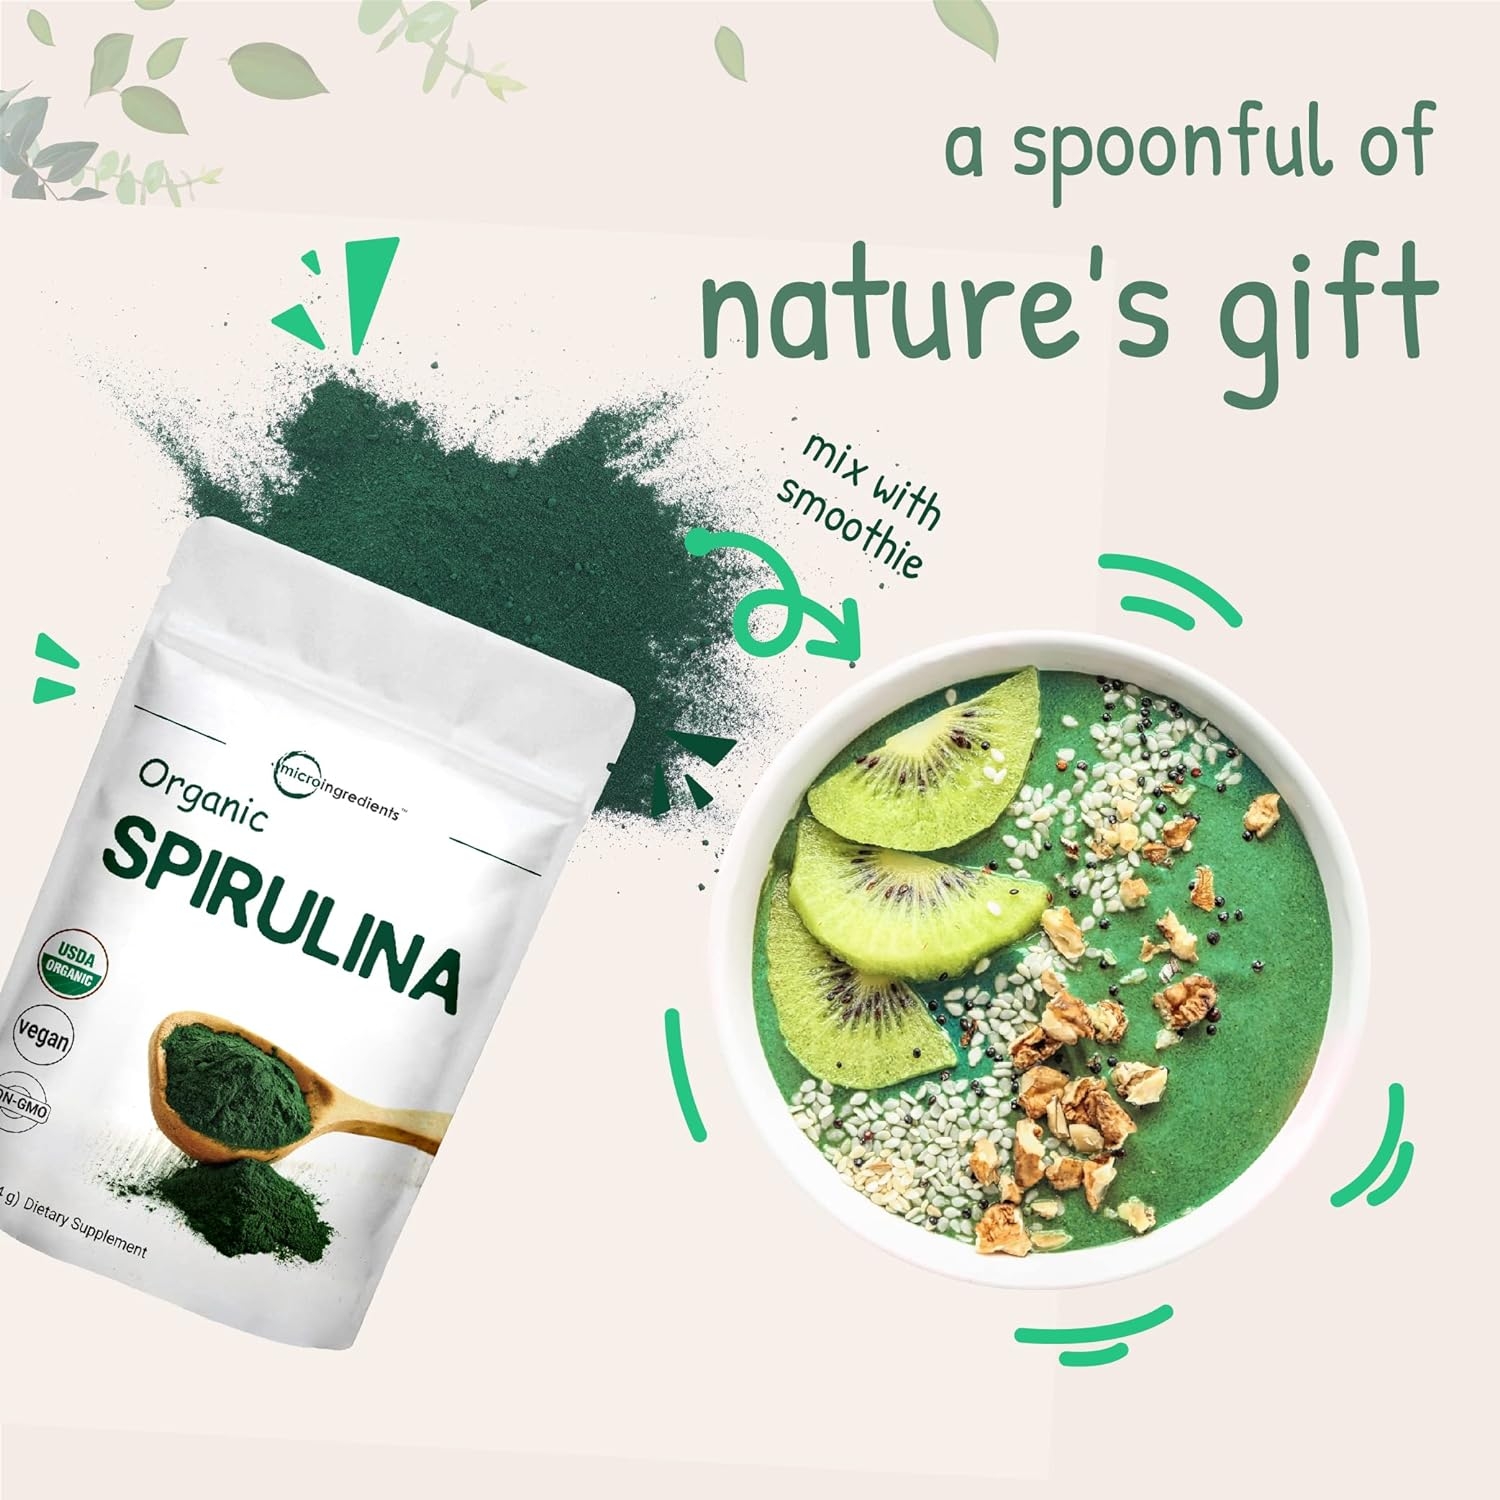 Micro Ingredients Organic Spirulina Powder, 1 Pound (16 Ounce), Rich in Chlorophyll, Minerals, Fatty Acids, Fiber, Protein and Support Immune System, No Irradiated, No Contaminated, No GMOs